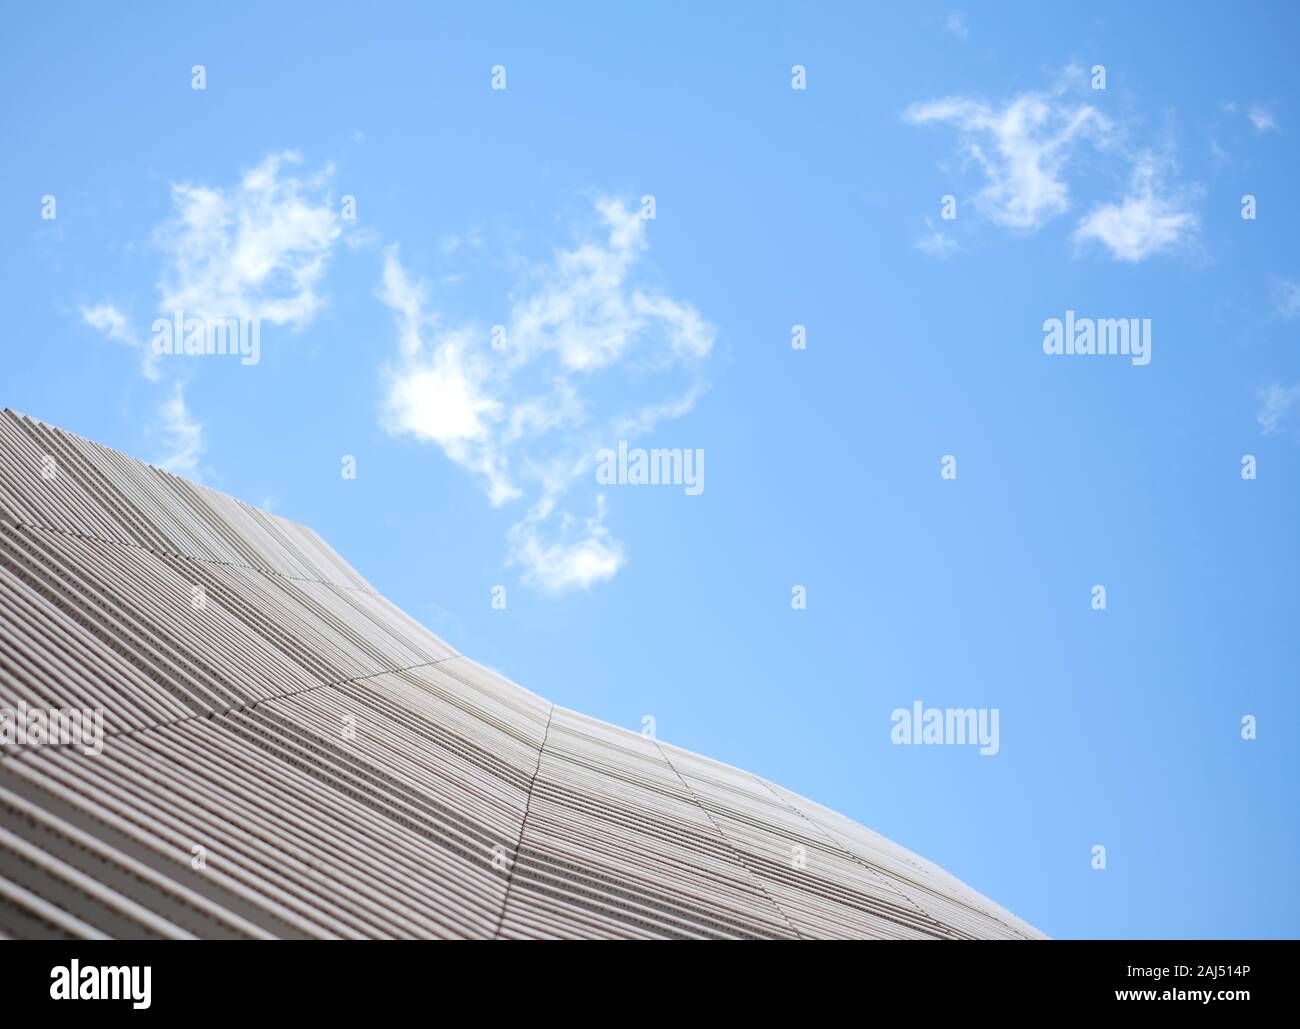 Undulating wavy facade of a clean white modern building, abstract architecture with blue sky and fluffy clouds. Stock Photo